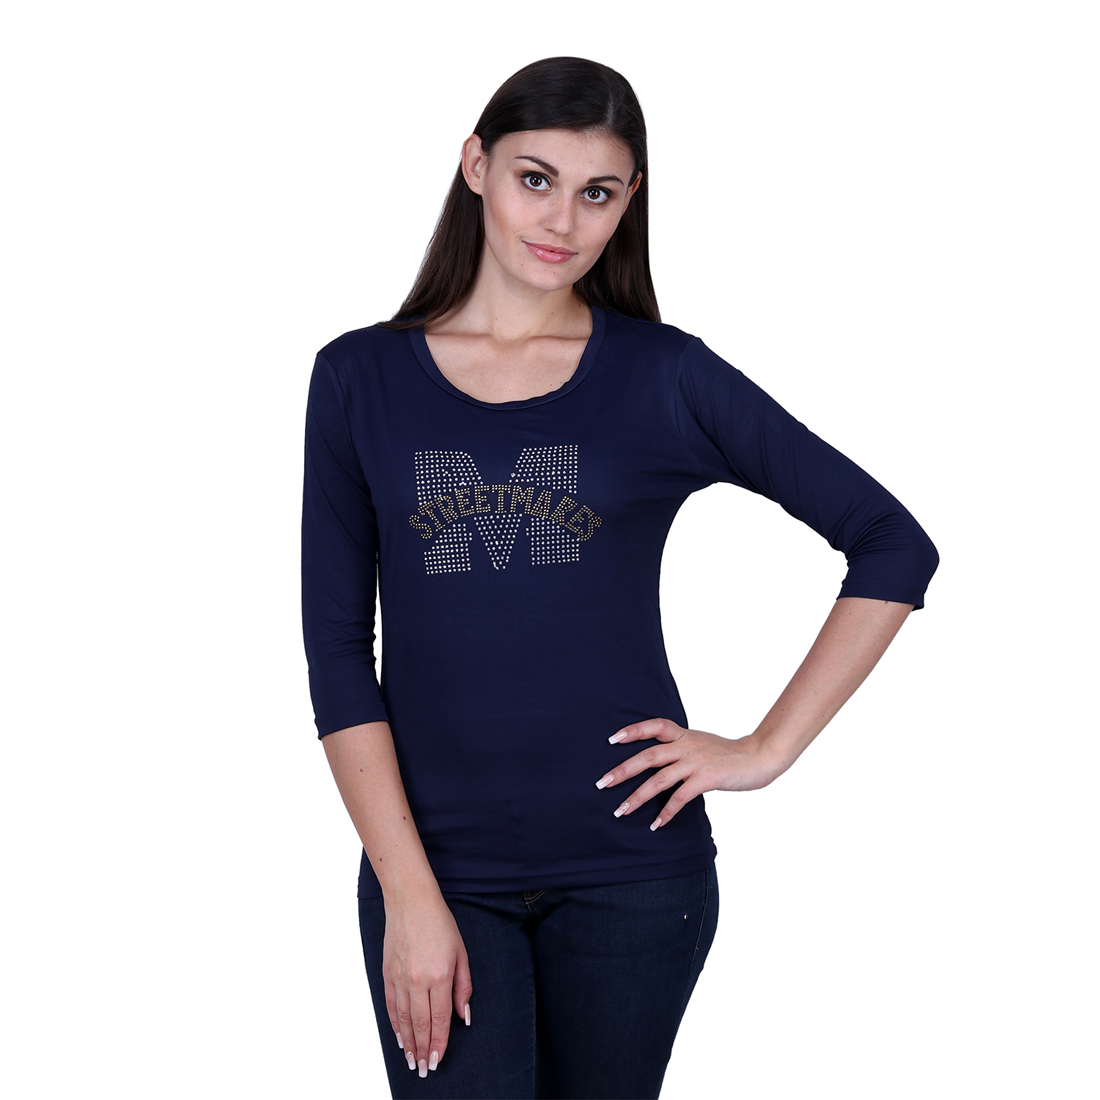 Buy Abloom women's casual black top Online @ ₹289 from ShopClues